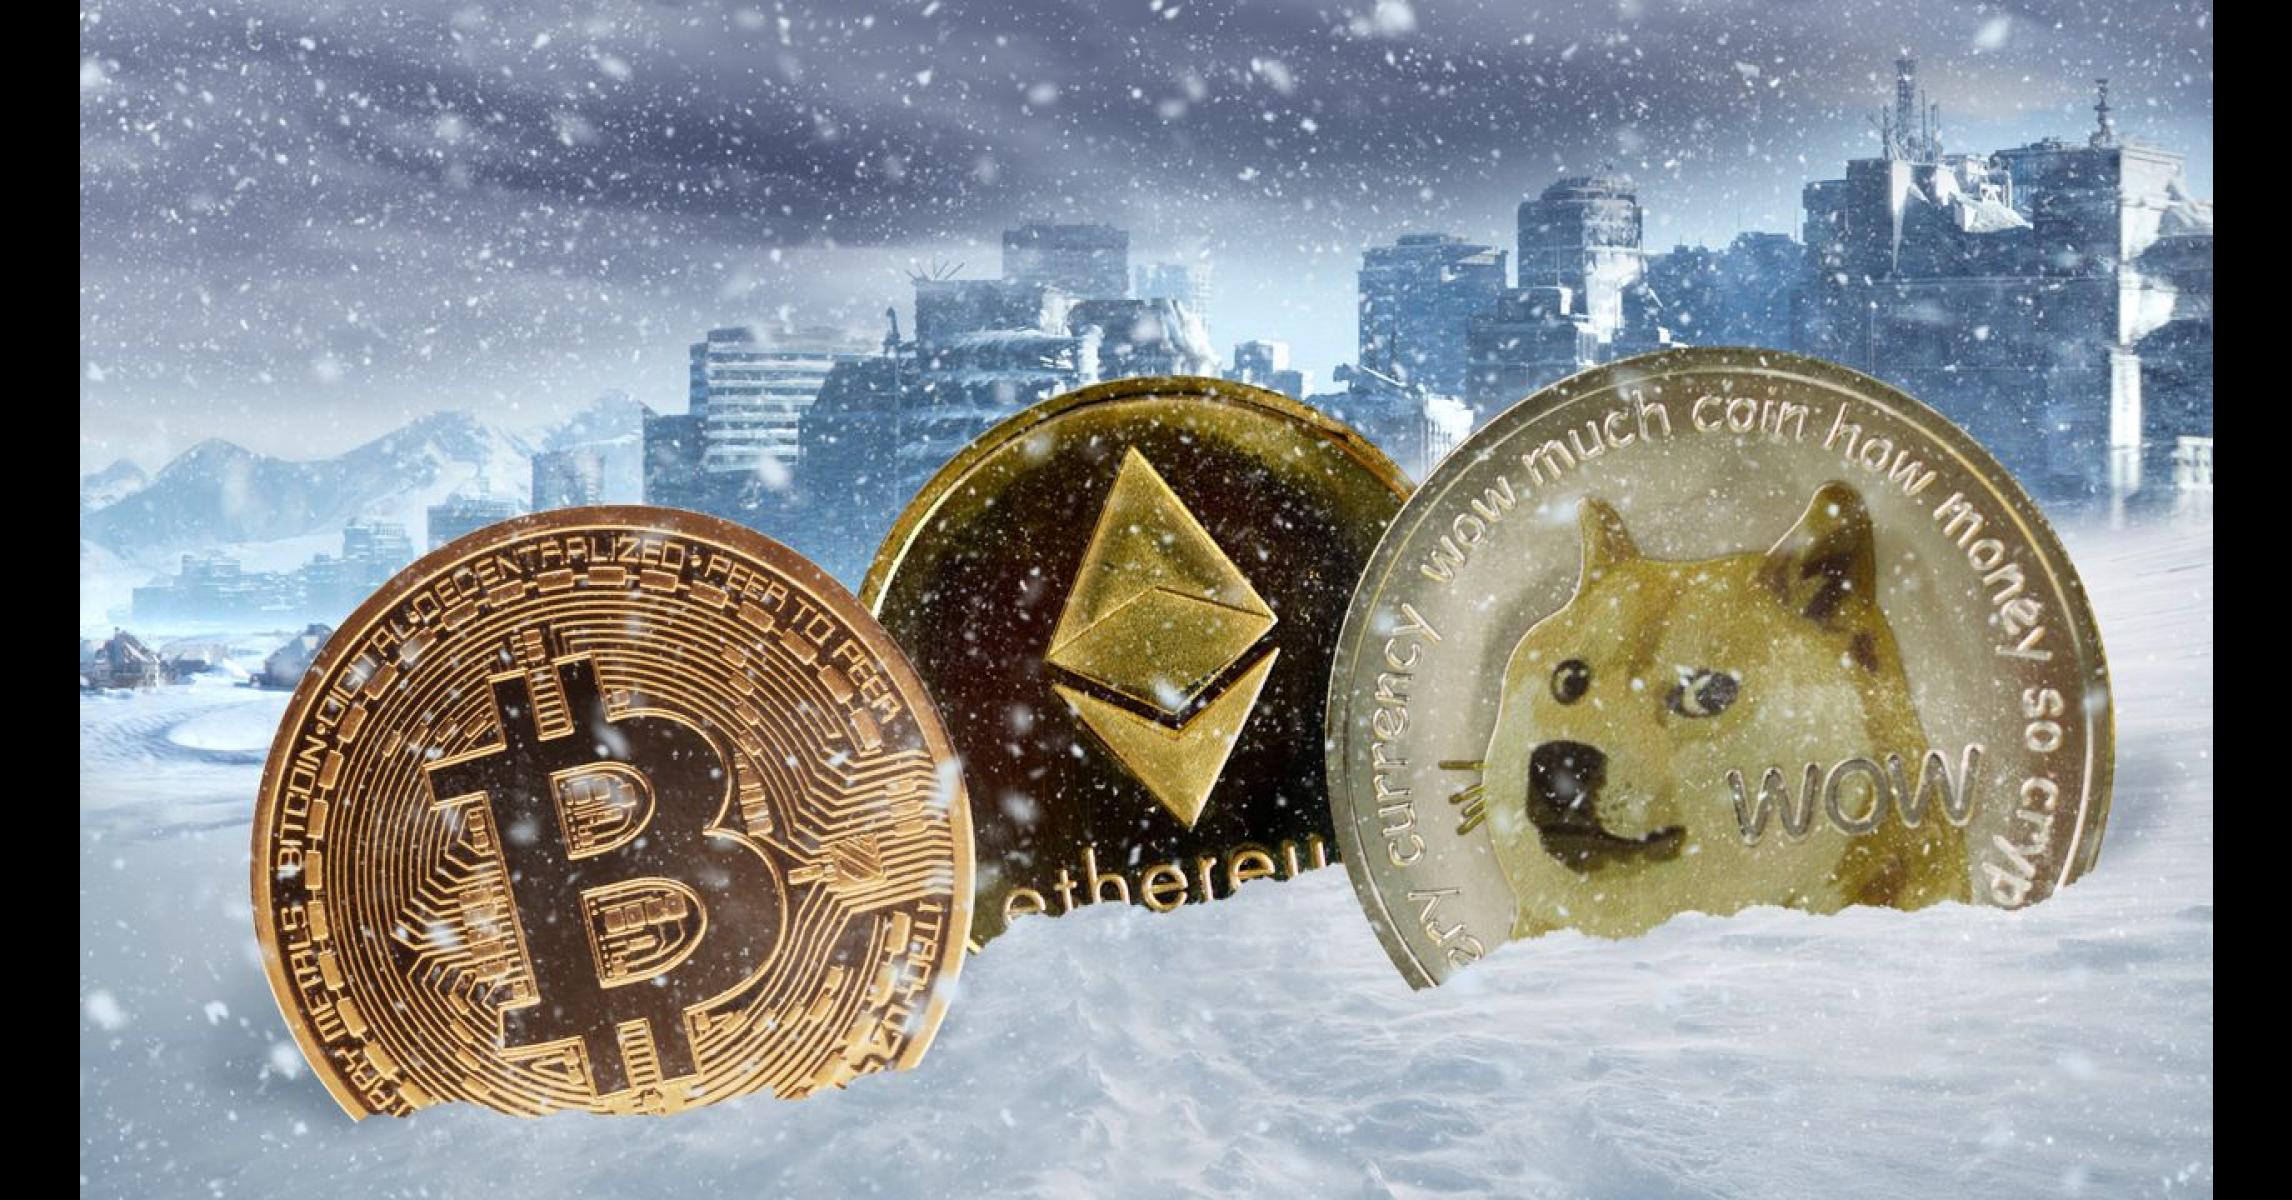 Crypto winter has arrived why crypto CFDs might be a good option to